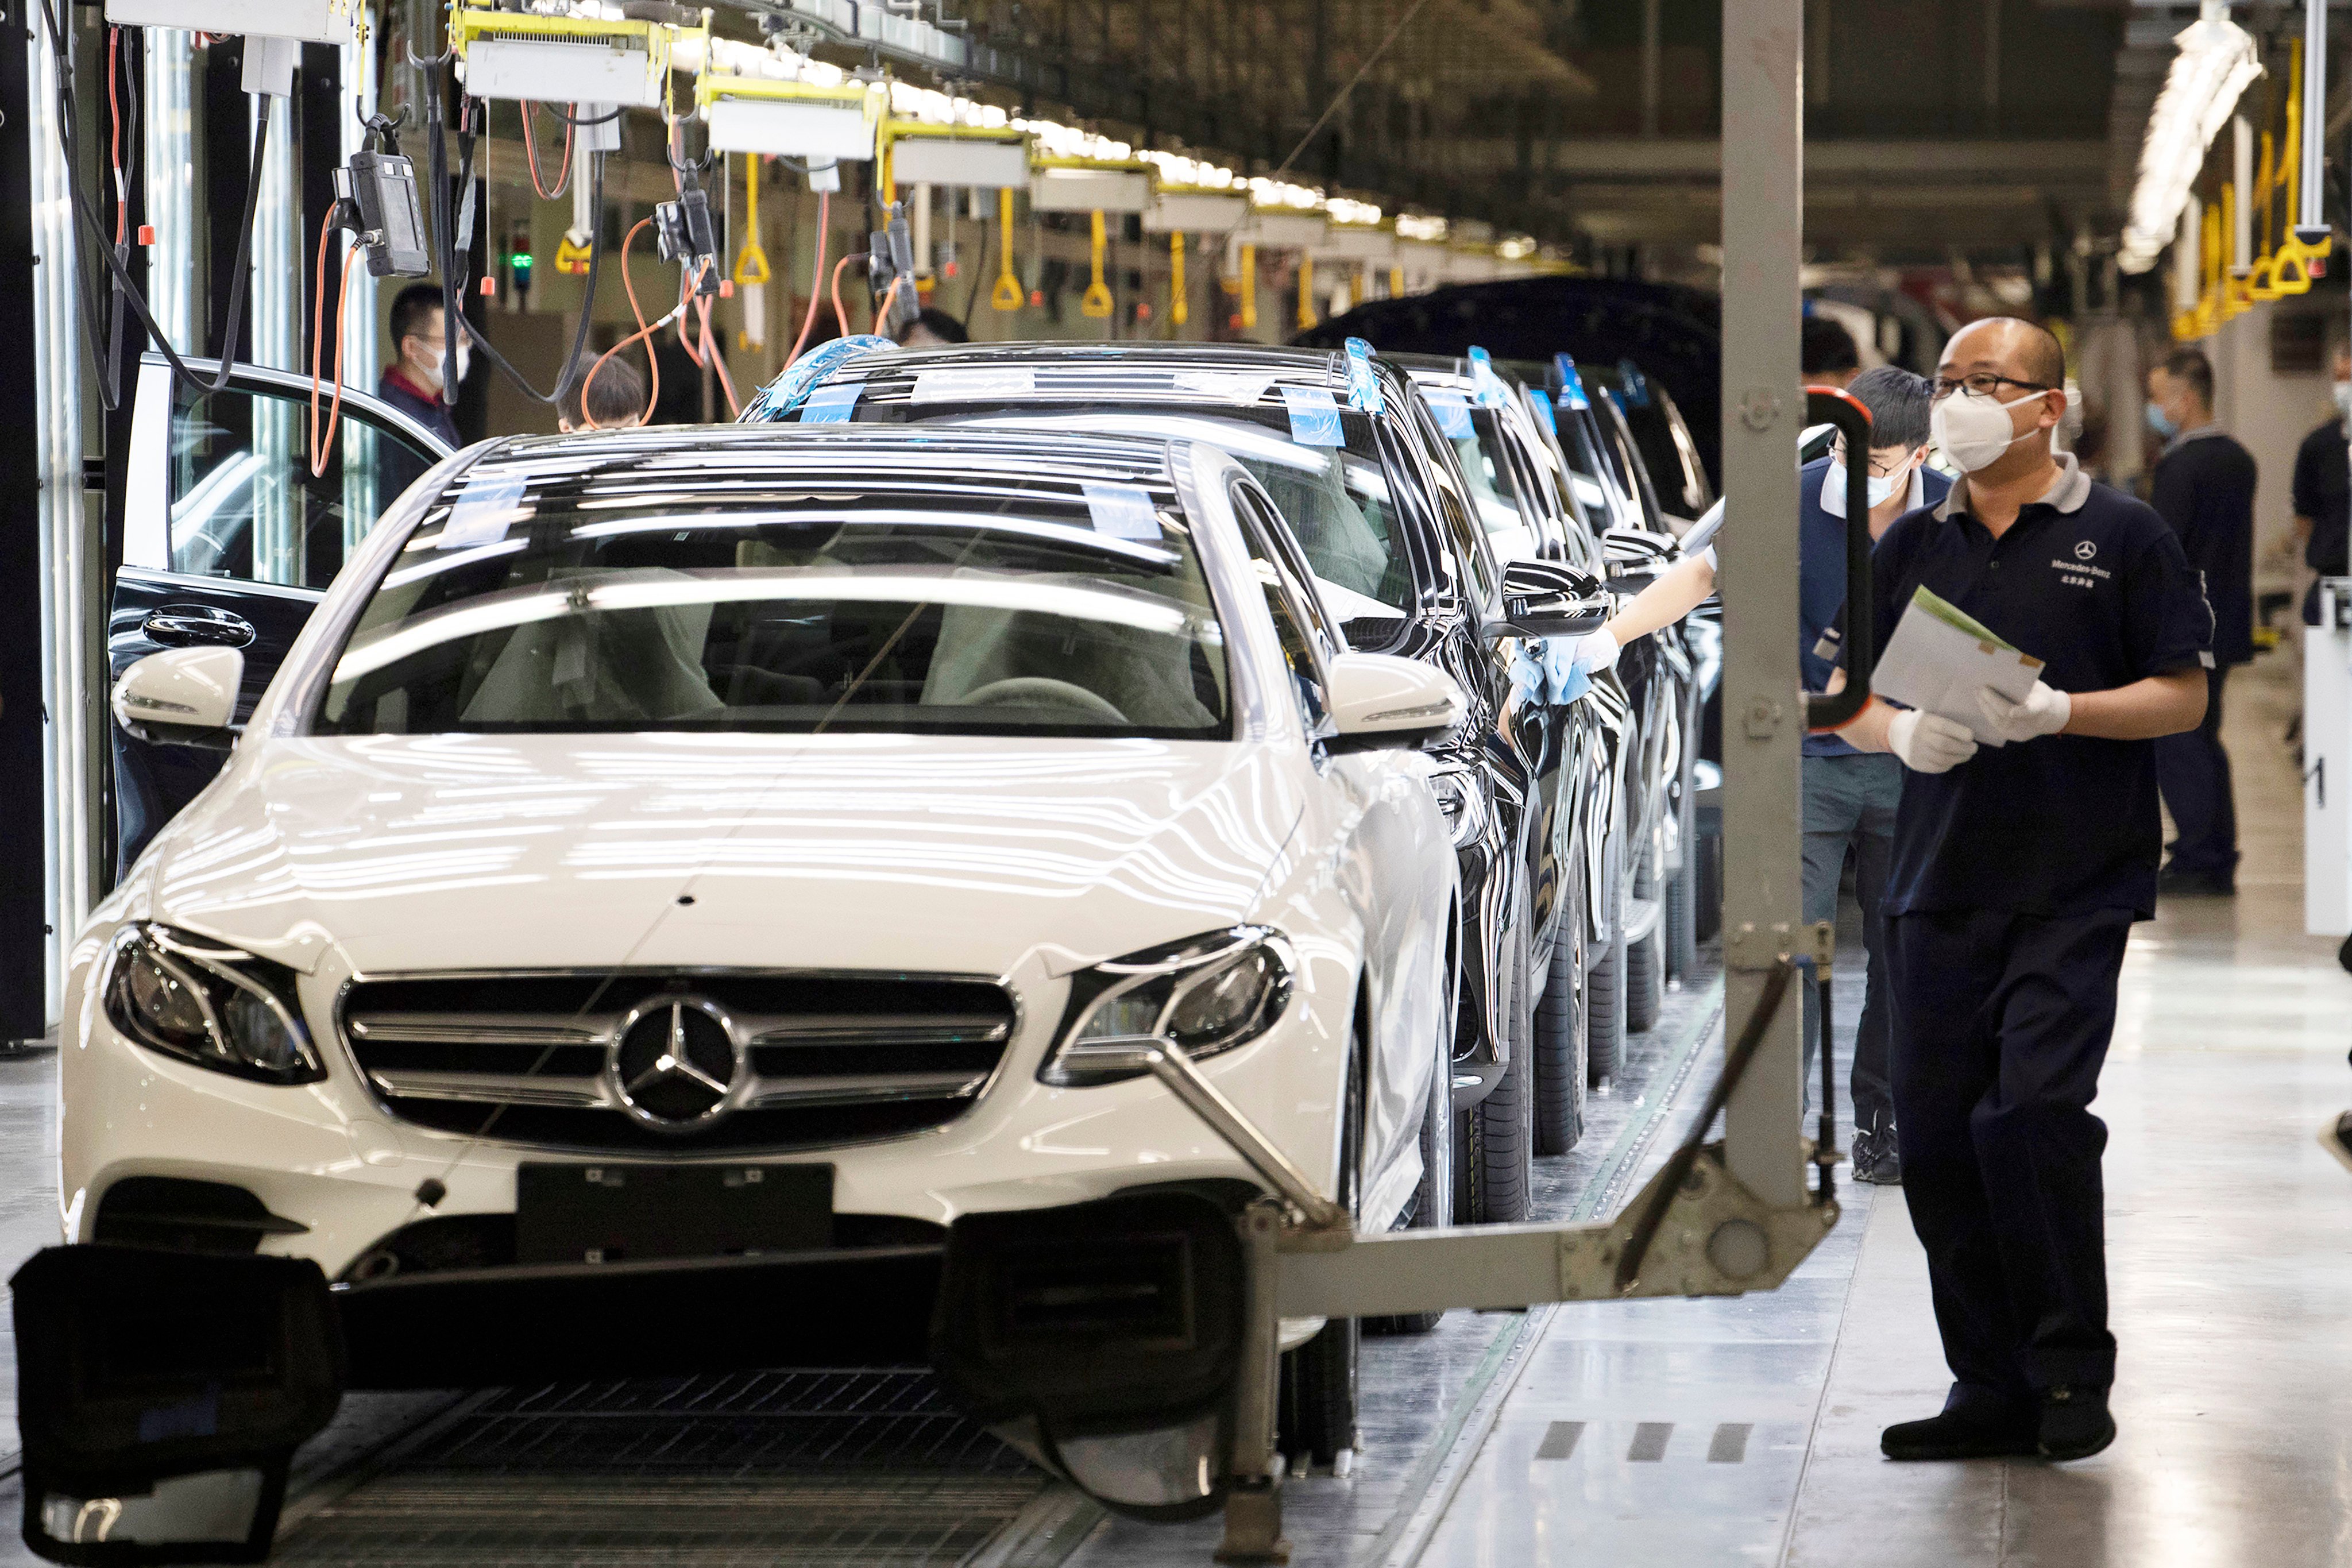 Workers inspect newly assembled cars at a factory of Beijing Benz Automotive Company, a German joint venture in China for Mercedes-Benz, in May 2020. Photo: AP